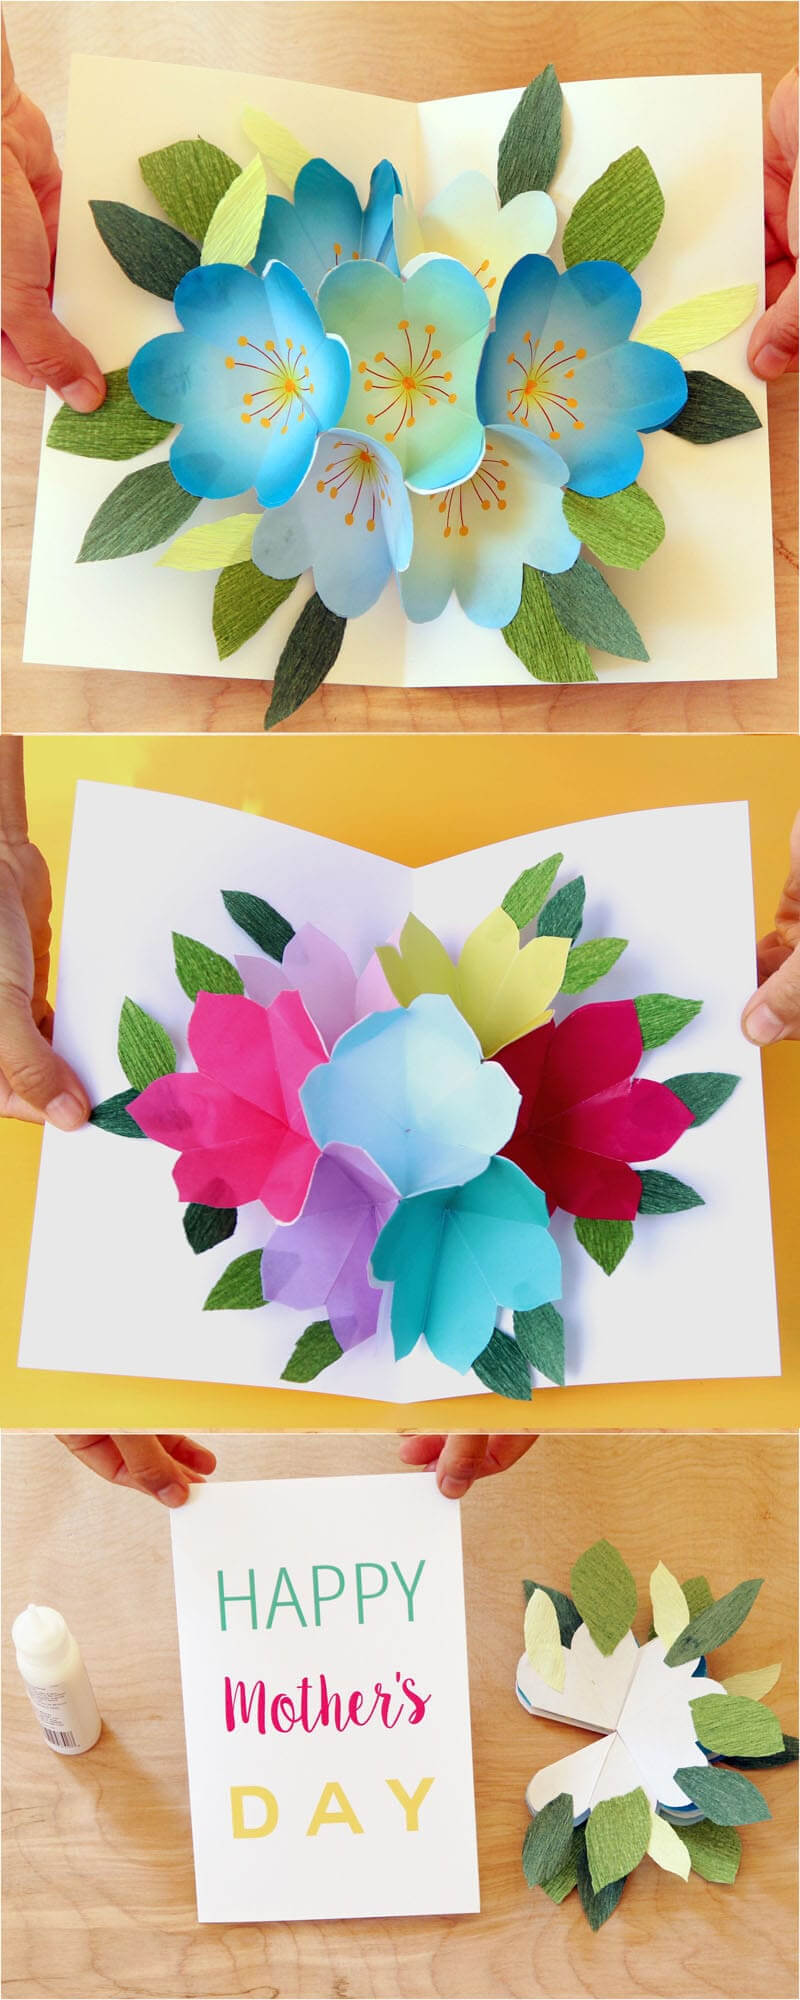 Pop Up Flowers Diy Printable Mother's Day Card – A Piece Of With Regard To Pop Up Card Templates Free Printable